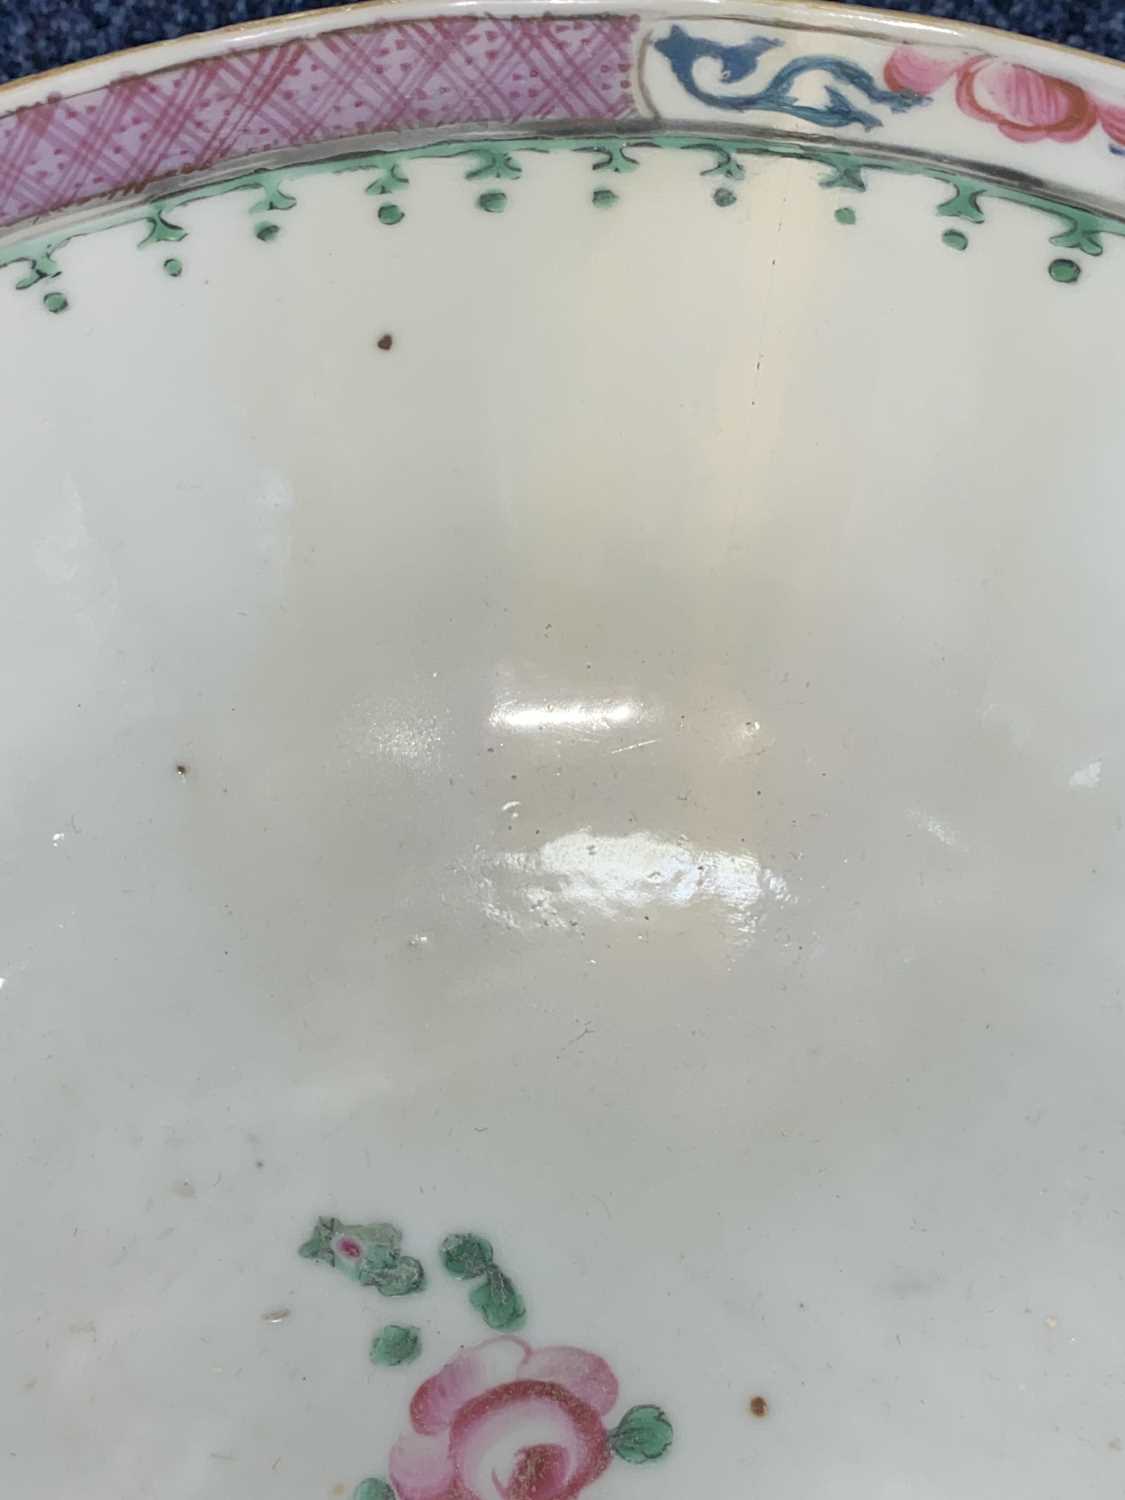 GROUP OF 18TH CENTURY CHINESE FAMILLE ROSE BOWLS, QIANLONG PERIOD (1736 - 1795) - Image 6 of 17